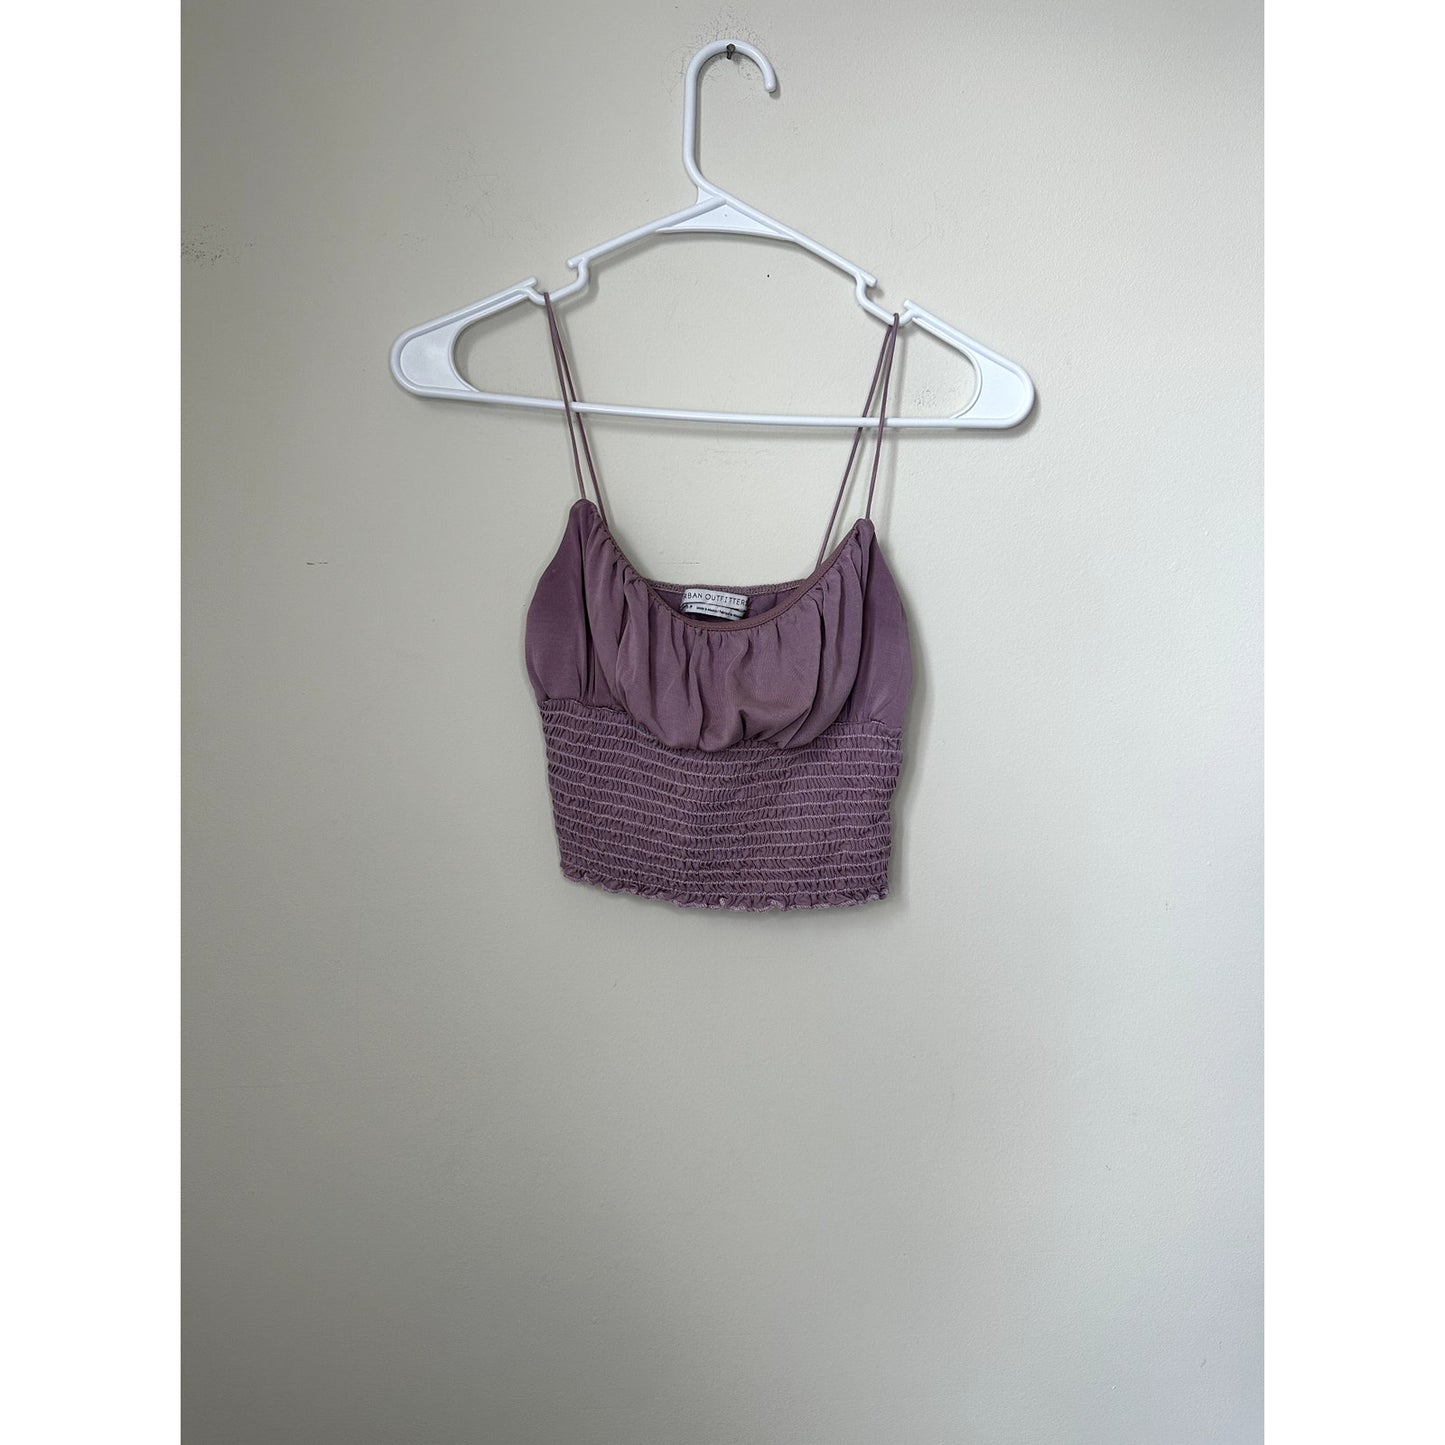 Urban Outfitters Light Purple Crop Top, Size S